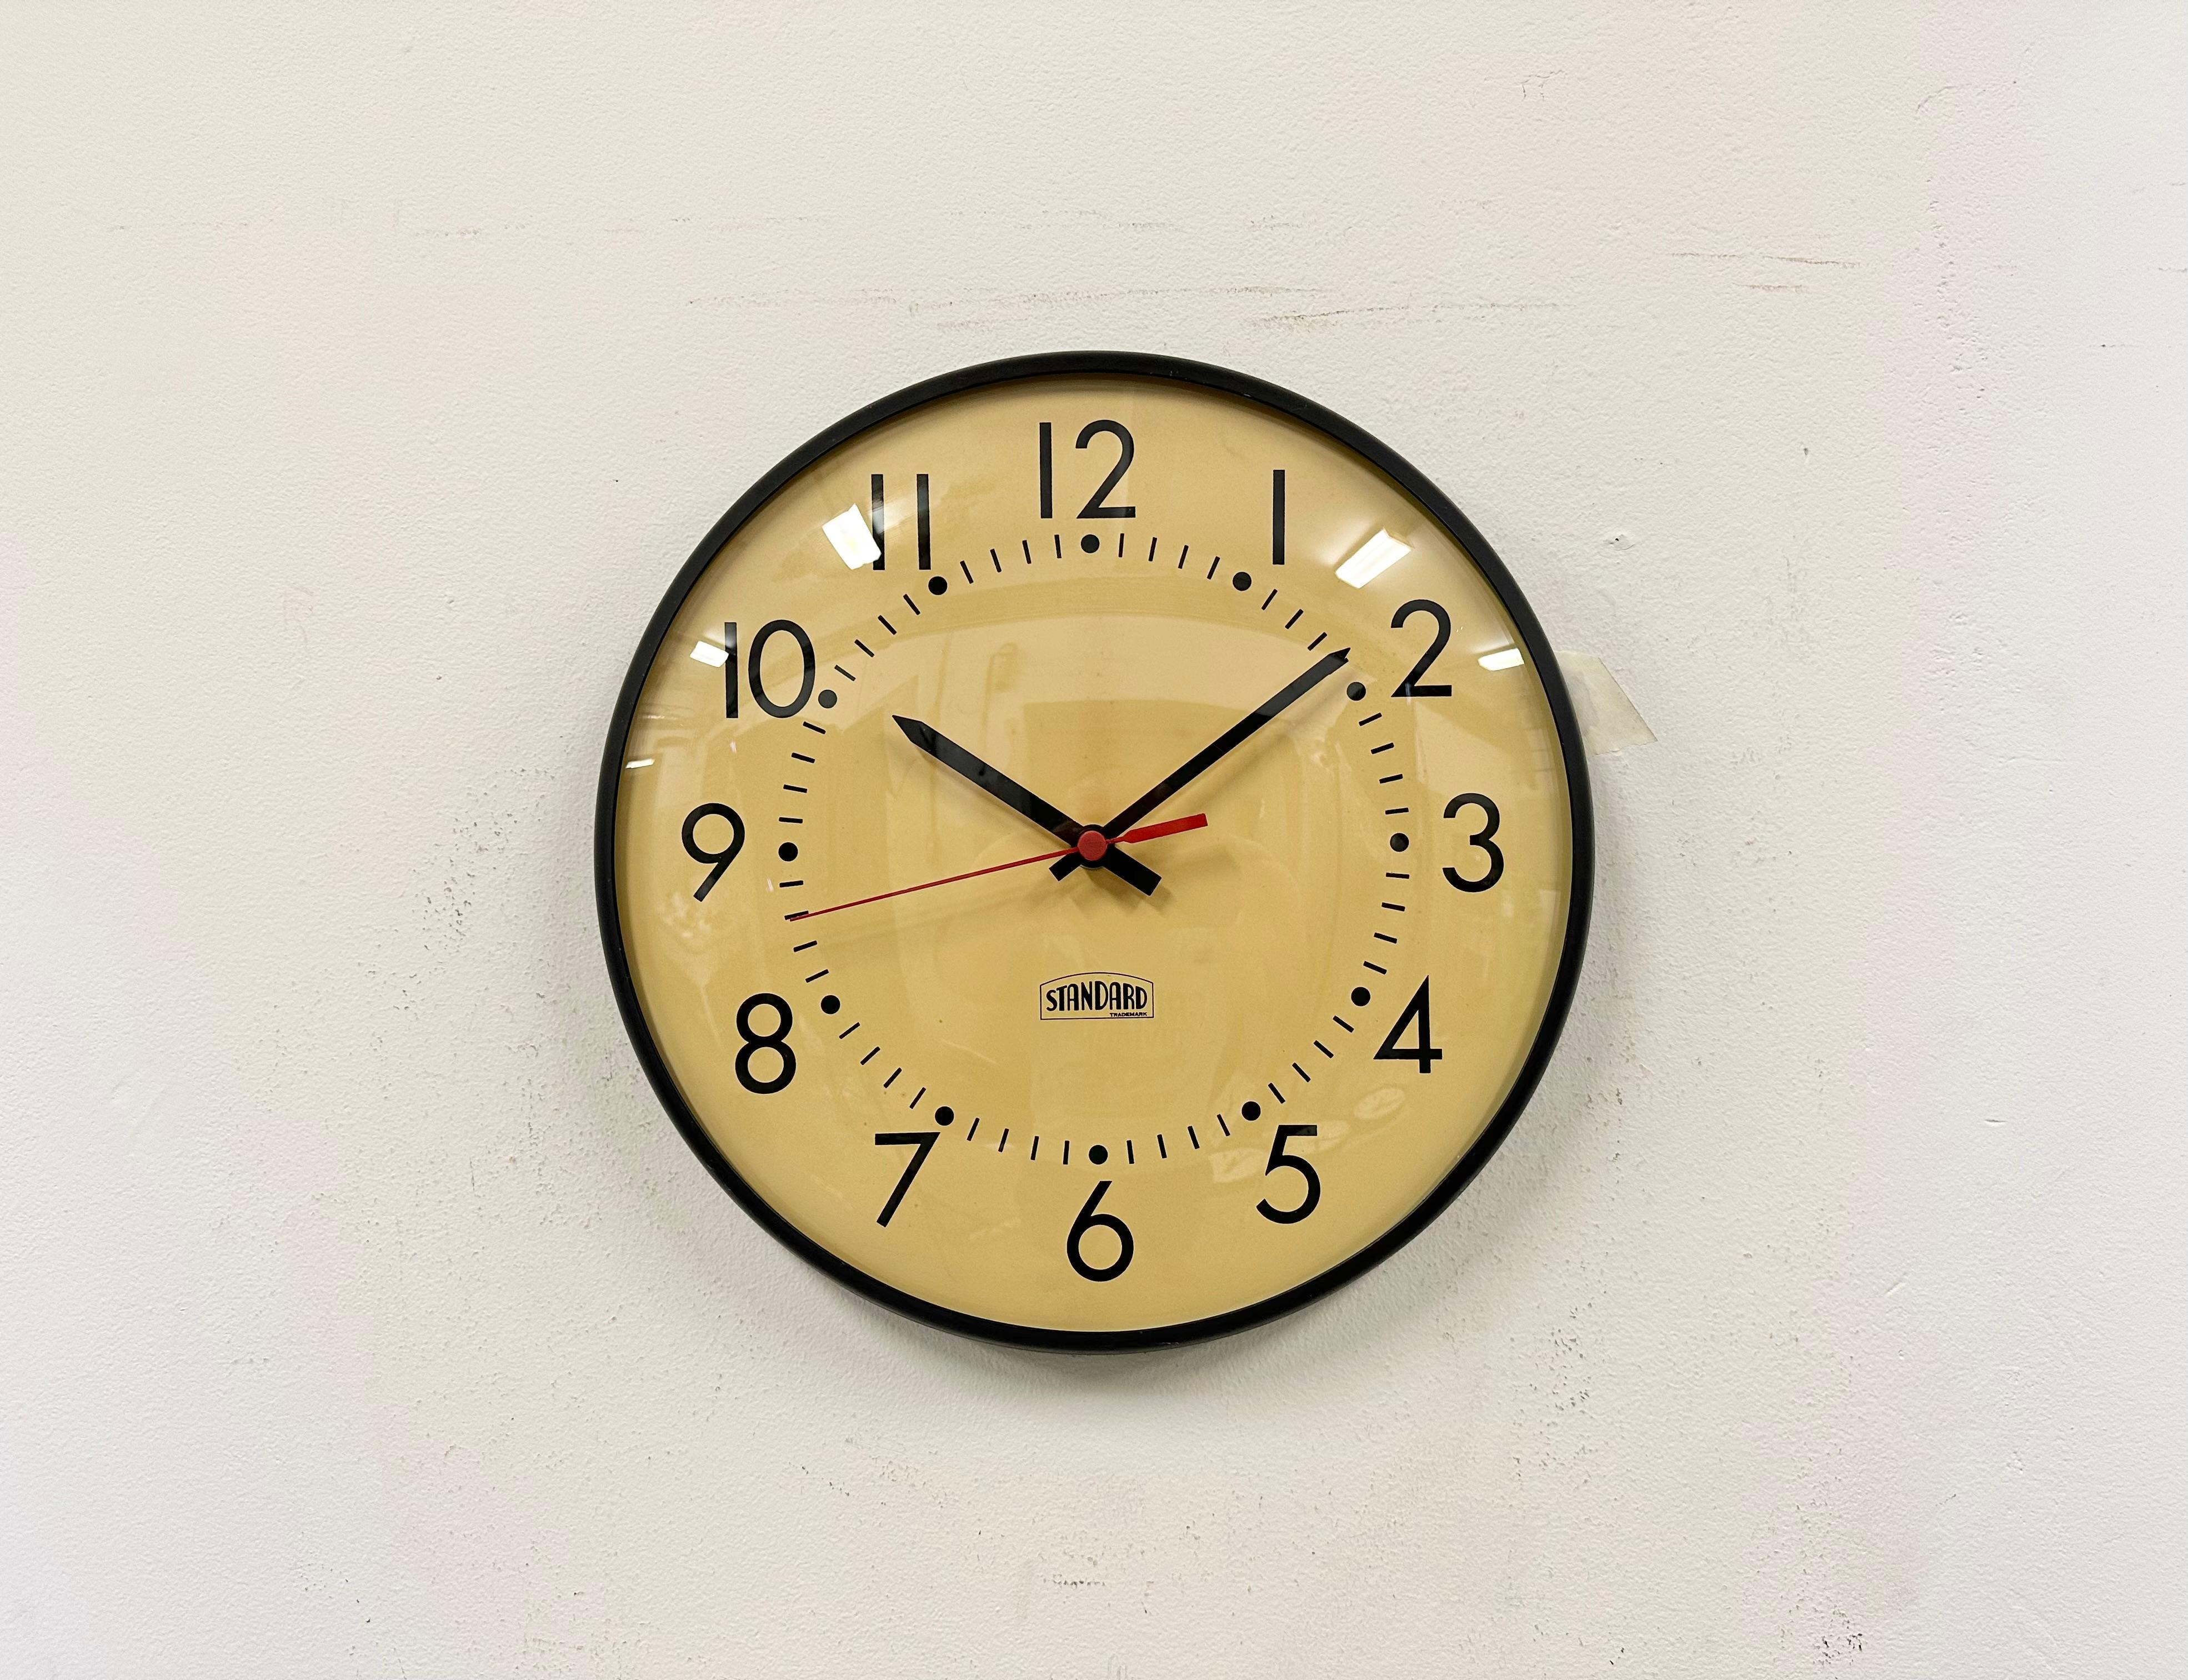 Wall clock made by Standard Electric in U.S.A. during the 1970s. It features a black iron frame, a metal dial, an aluminium hands and curved clear glass cover. The piece has been converted into a battery-powered clockwork and requires only one